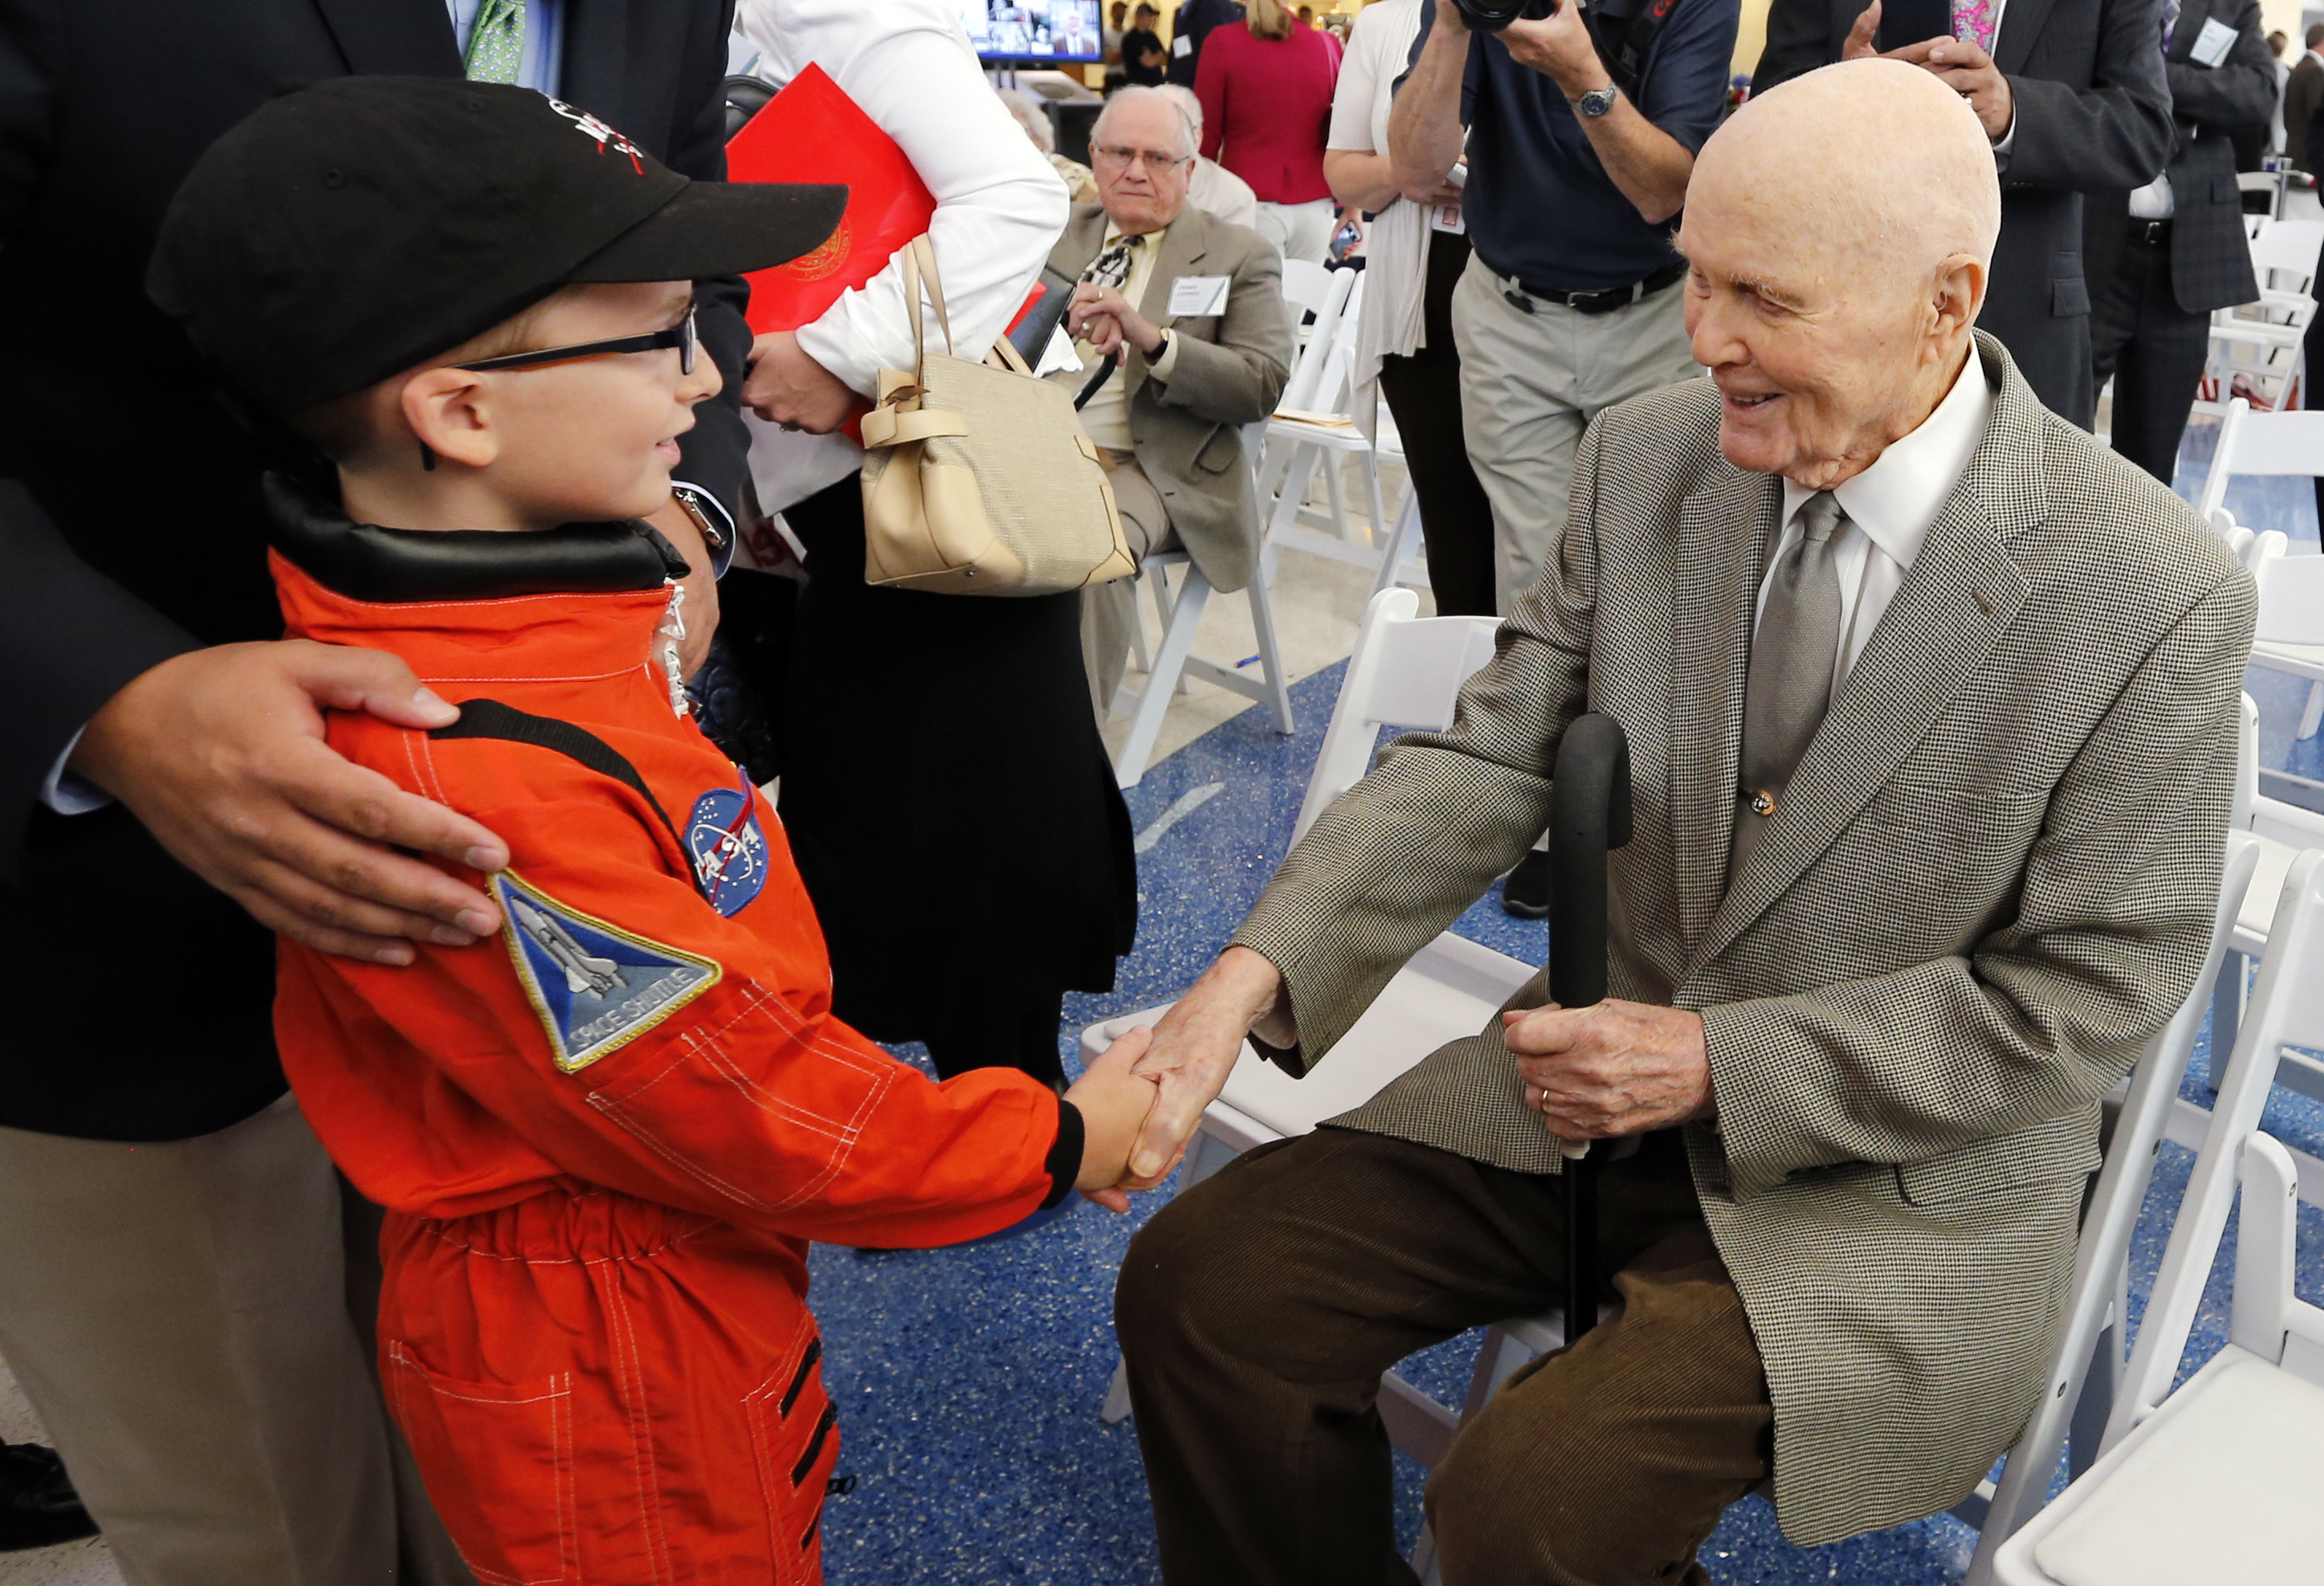 Former U.S. Sen. John Glenn, right, shakes hands with eight-year-old Josh Schick before the start of a celebration for the renaming of Port Columbus International Airport to John Glenn Columbus International Airport Tuesday, June 28, 2016, in Columbus, Ohio. AP Photo/Jay LaPrete.